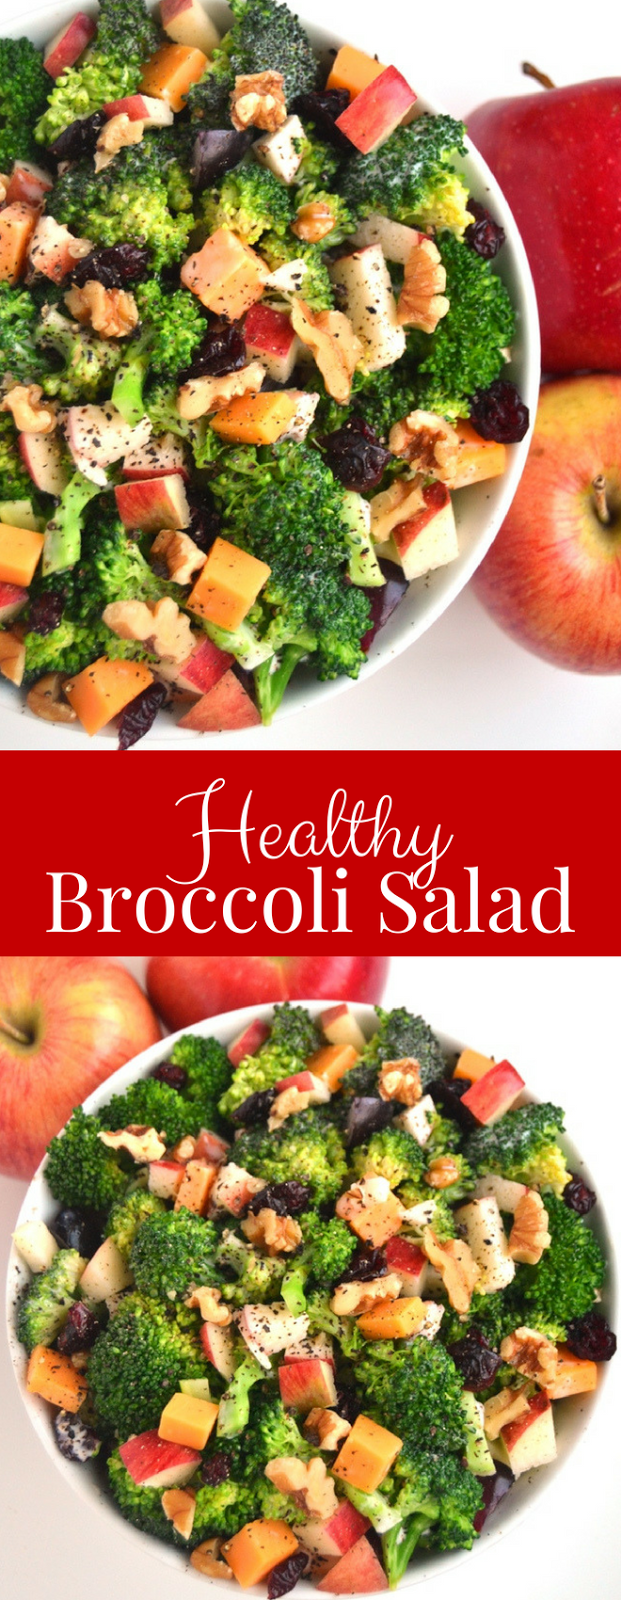 Healthy Broccoli Salad is made lighter with a creamy Greek yogurt dressing, Braeburn apples, cheddar cheese, grapes, walnuts and dried cranberries. www.nutritionistreviews.com